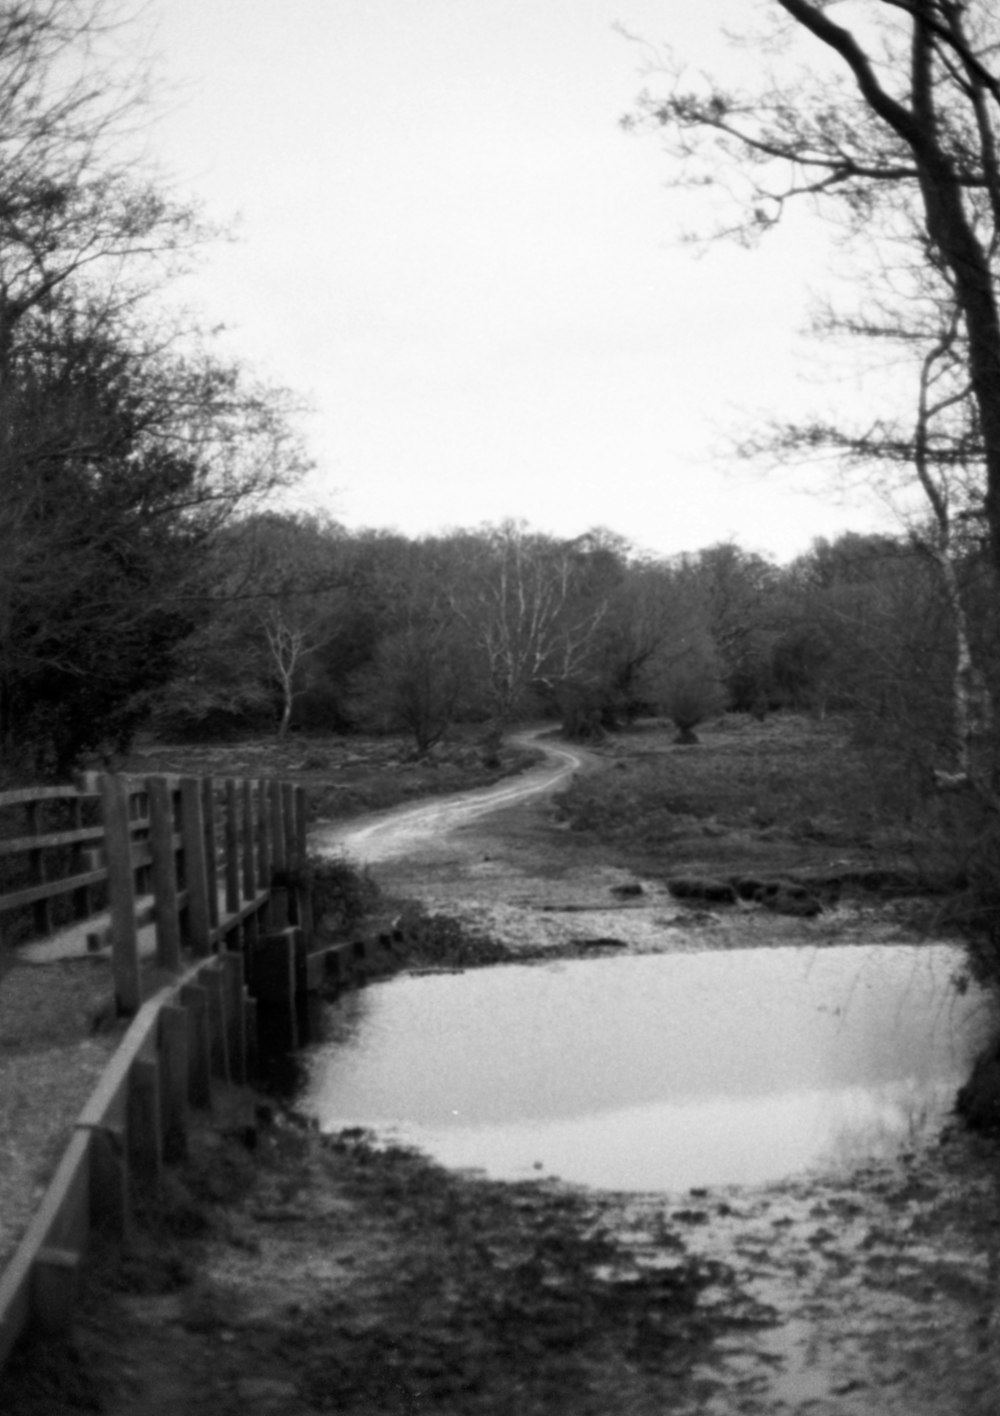 a black and white photo of a small pond